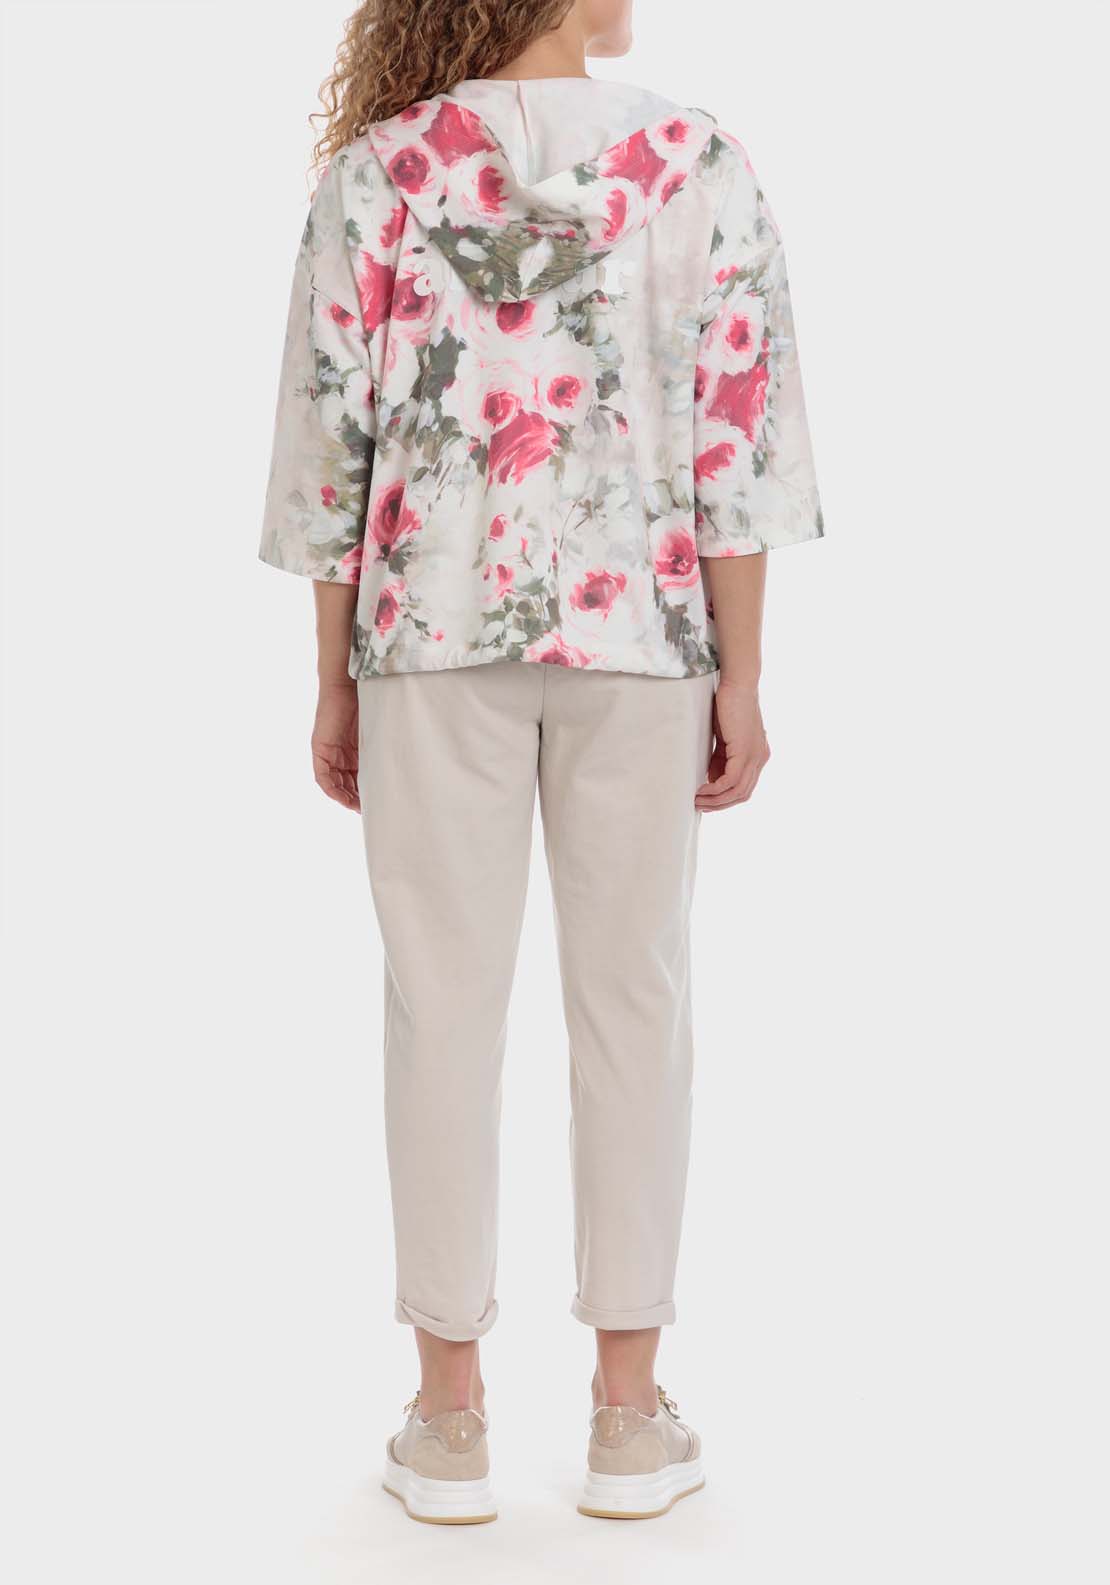 Punt Roma Floral Print Sports Jacket 4 Shaws Department Stores